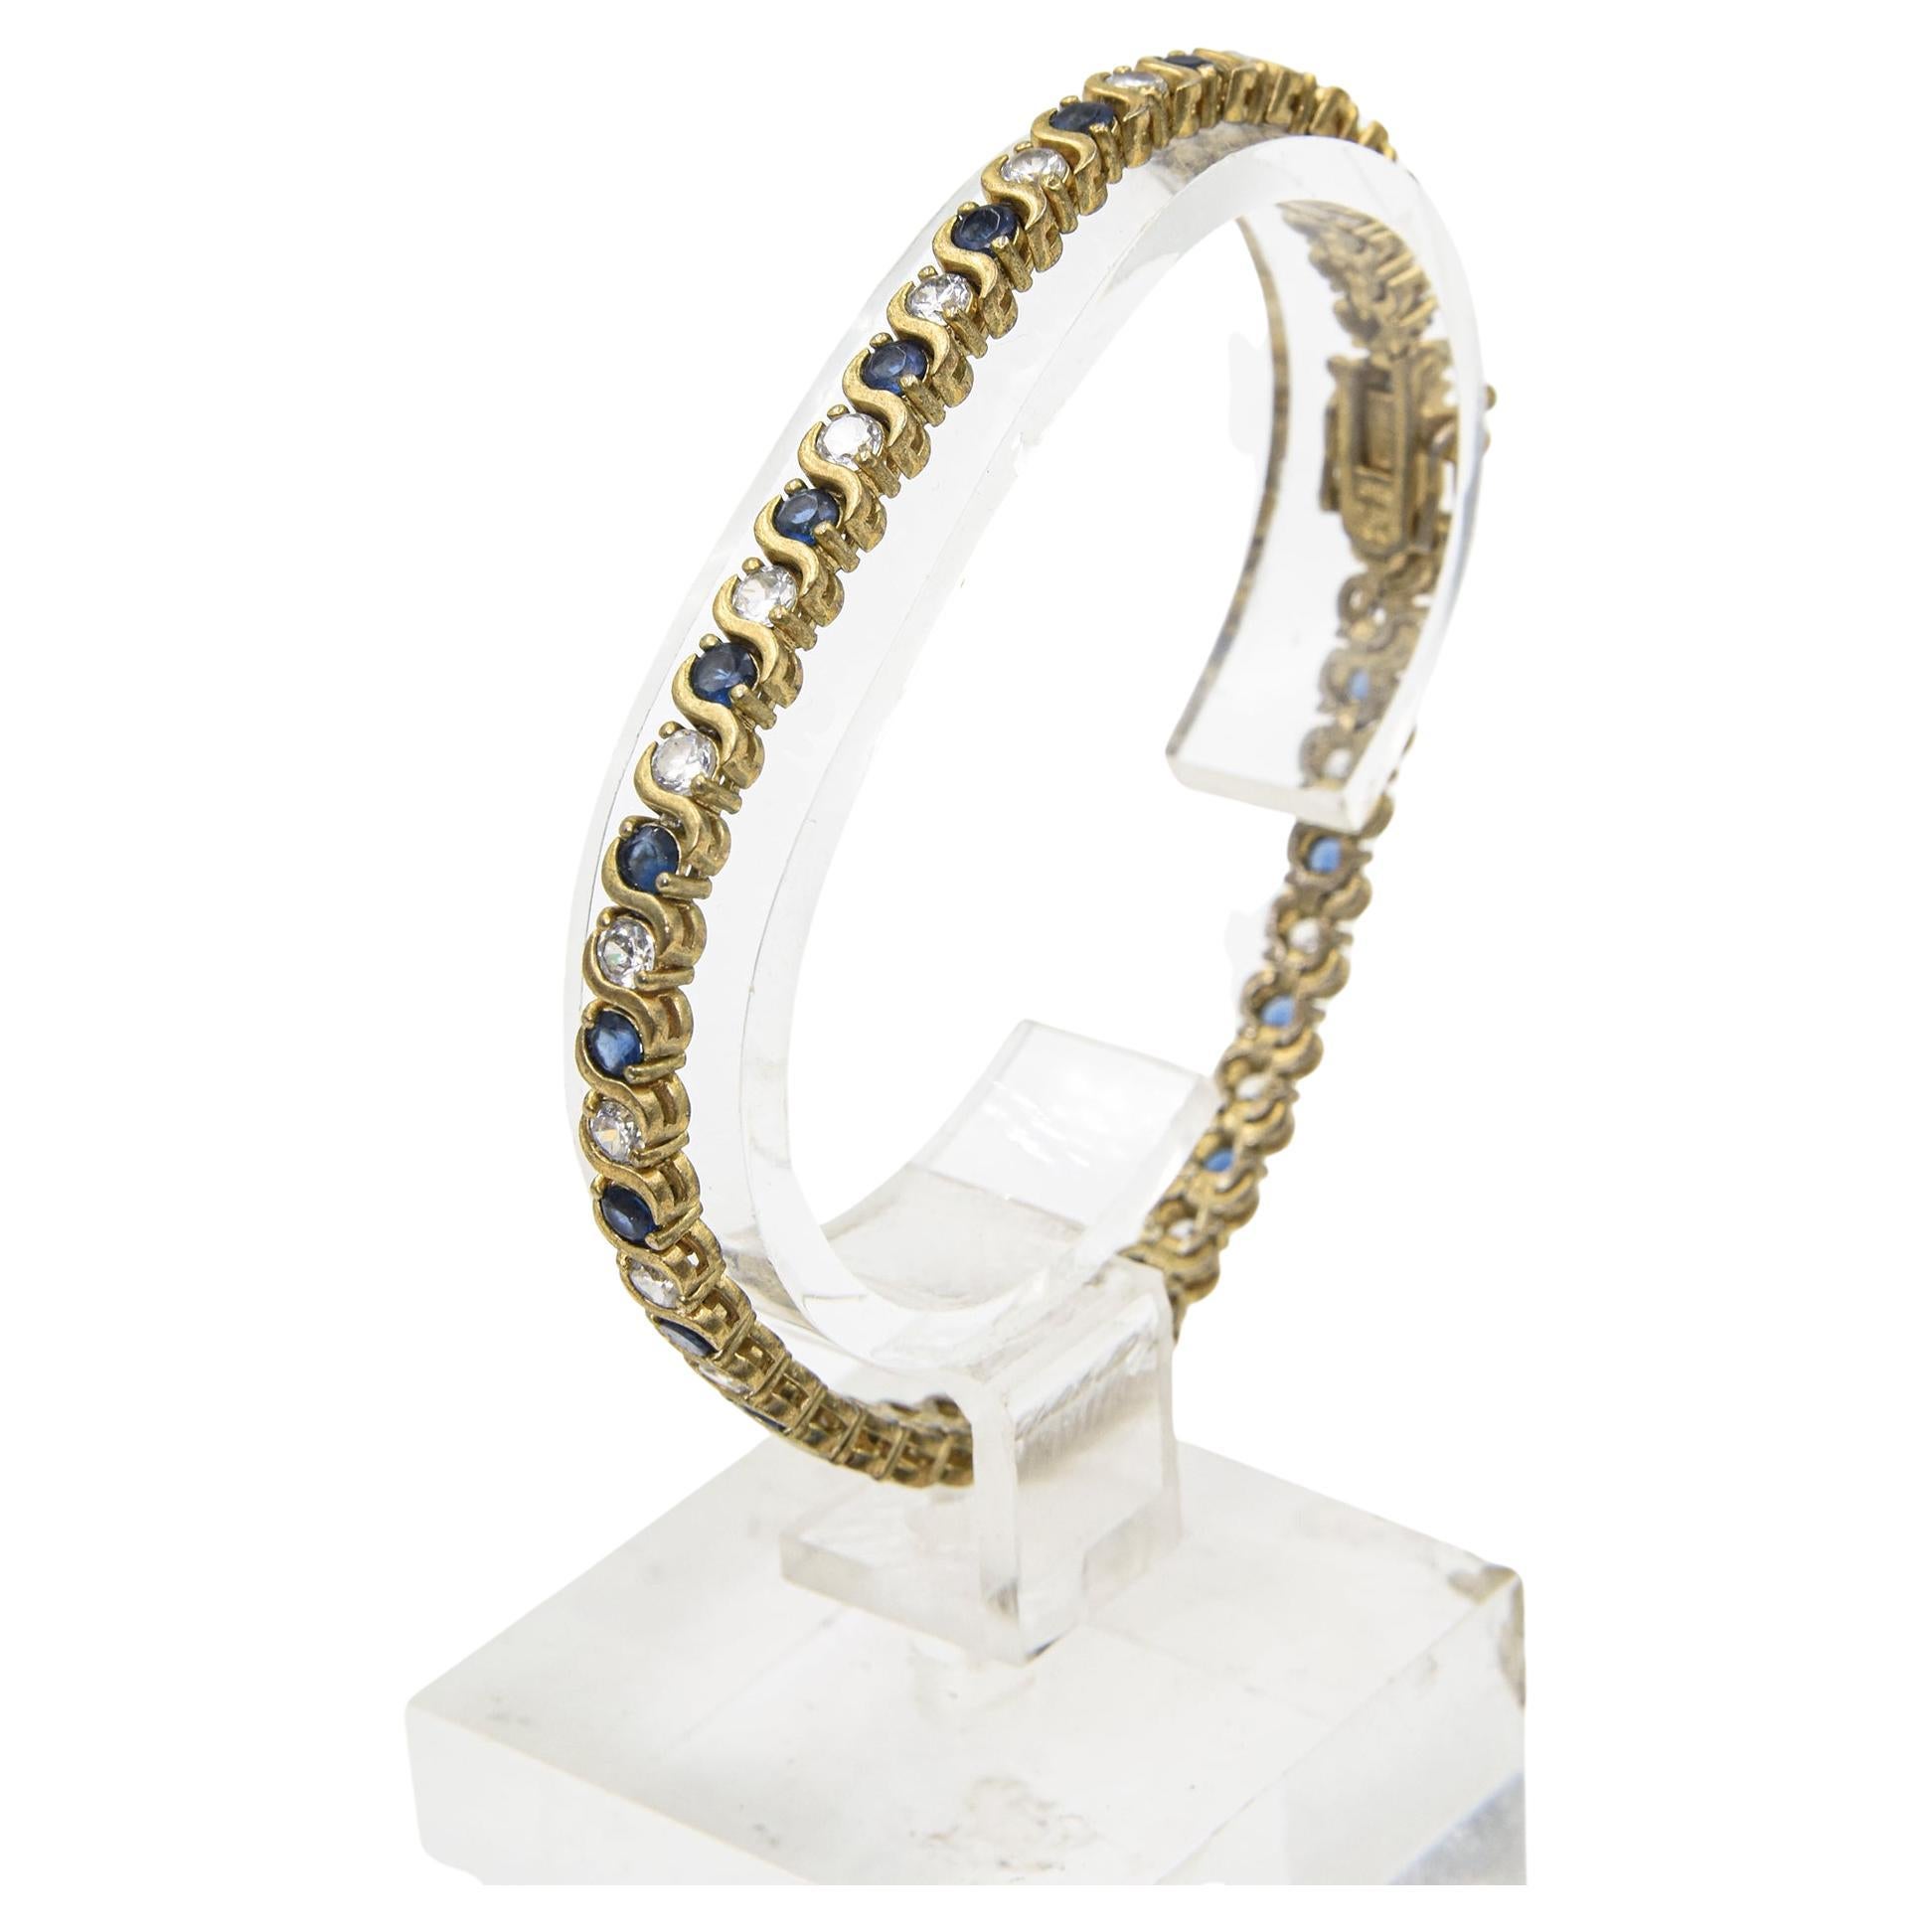 Faux sapphires and diamond bracelet made with crystal stones.  It combines classic tennis bracelet style with a colorful blue hue alternating with round-brilliant cut blue and clear crystals.  The stones are set in a gold plated sterling bracelet